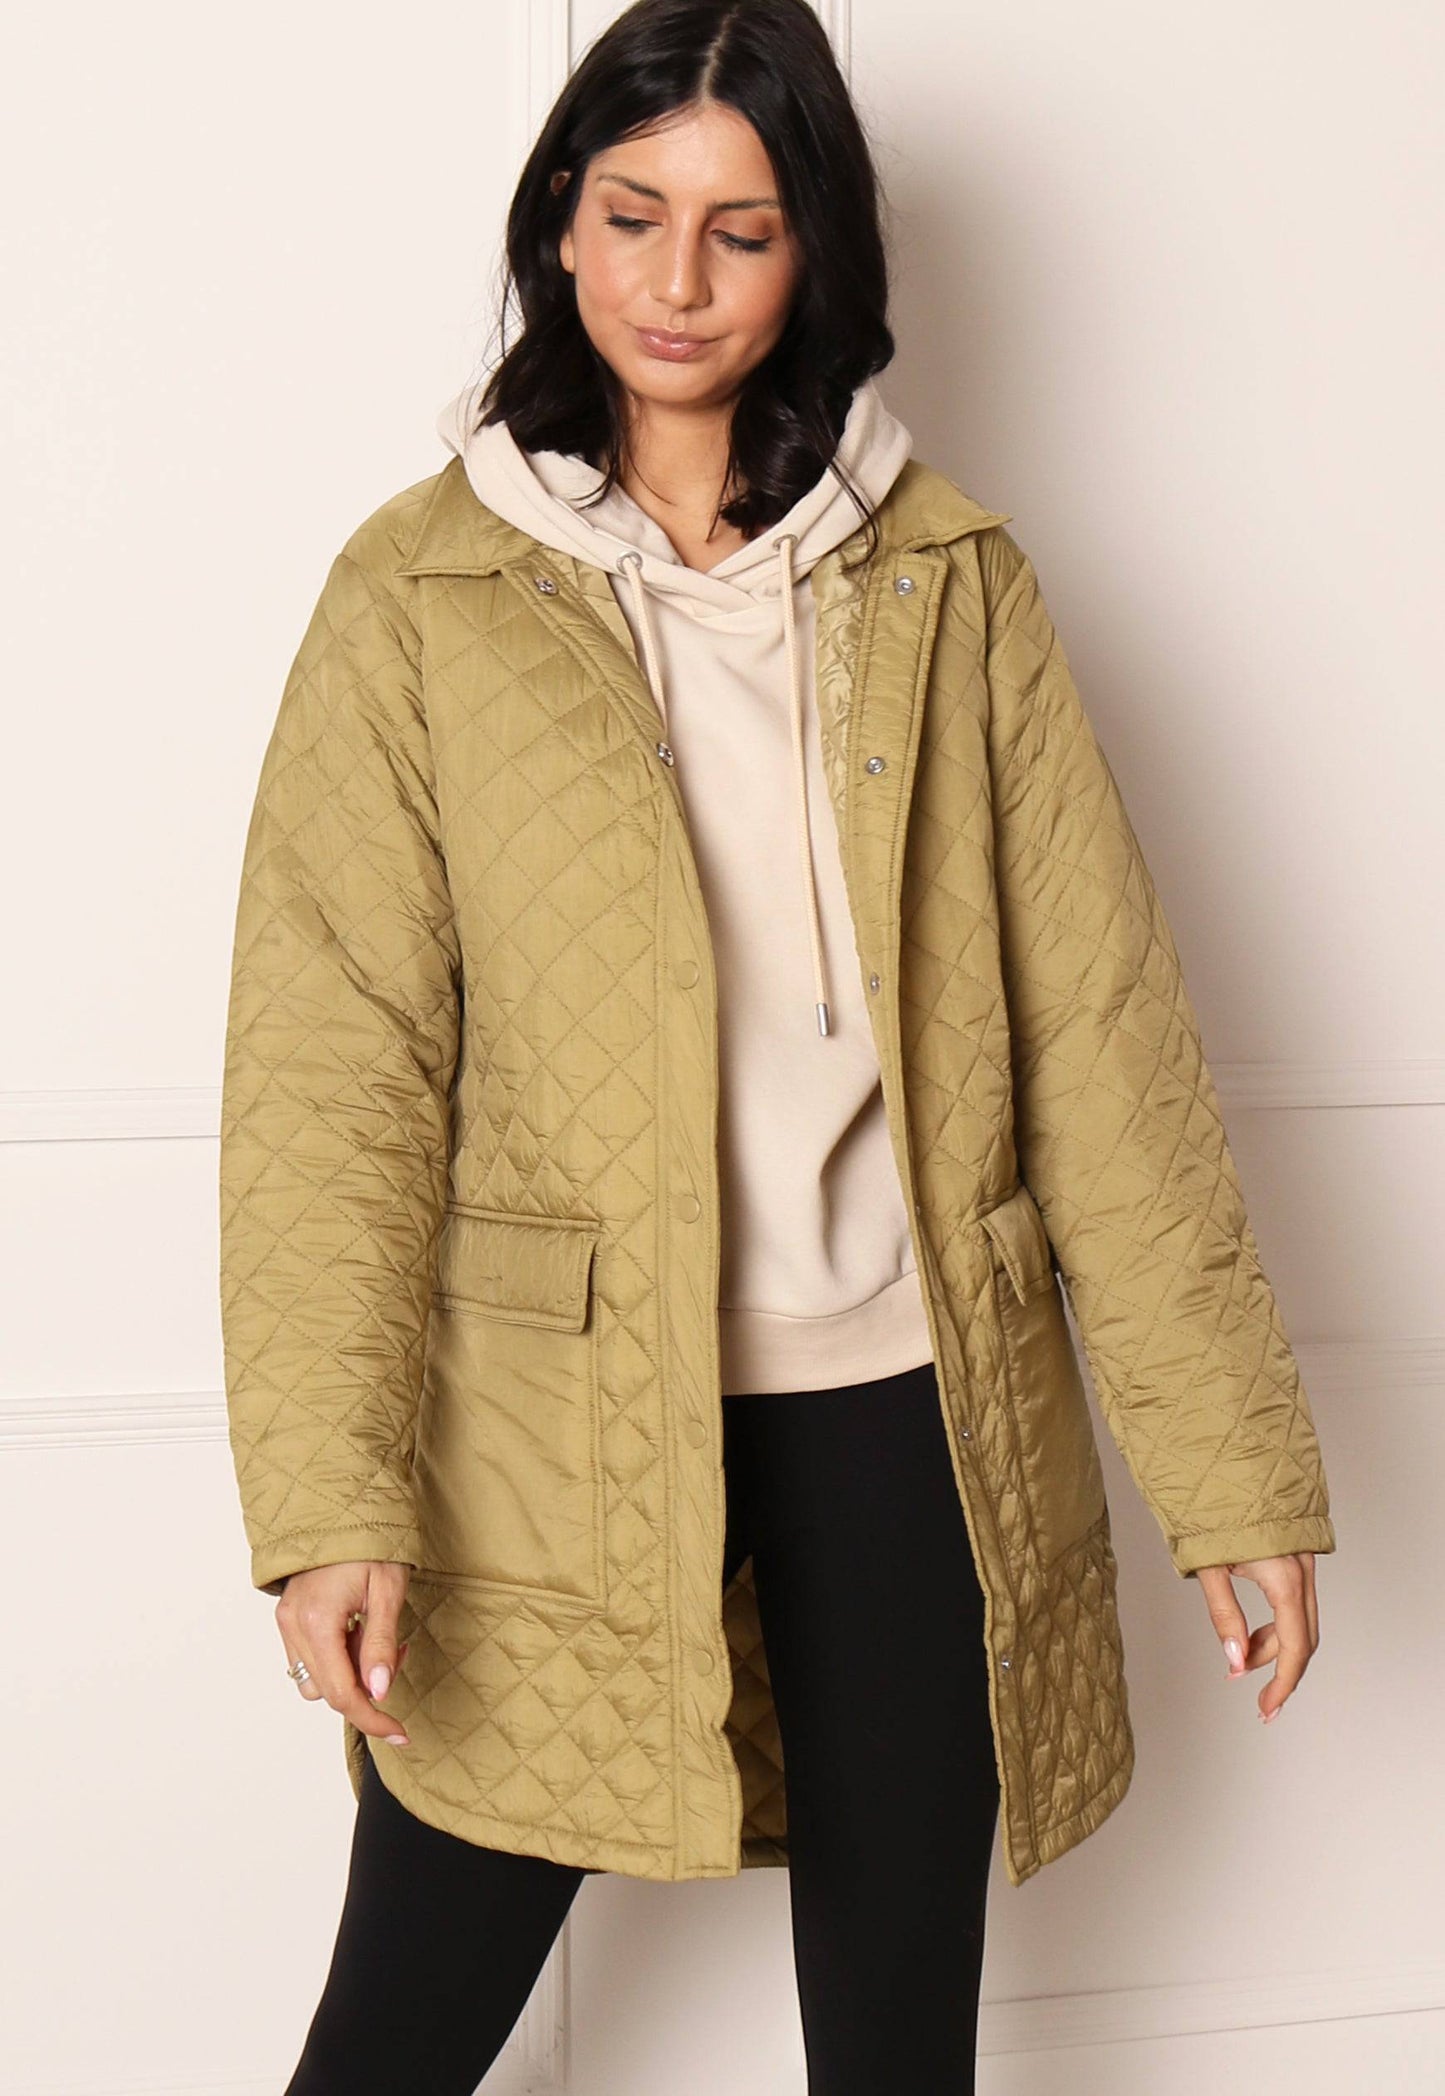 JDY Augusta Edith Diamond Quilted Long Shacket Jacket in Light Khaki - One Nation Clothing